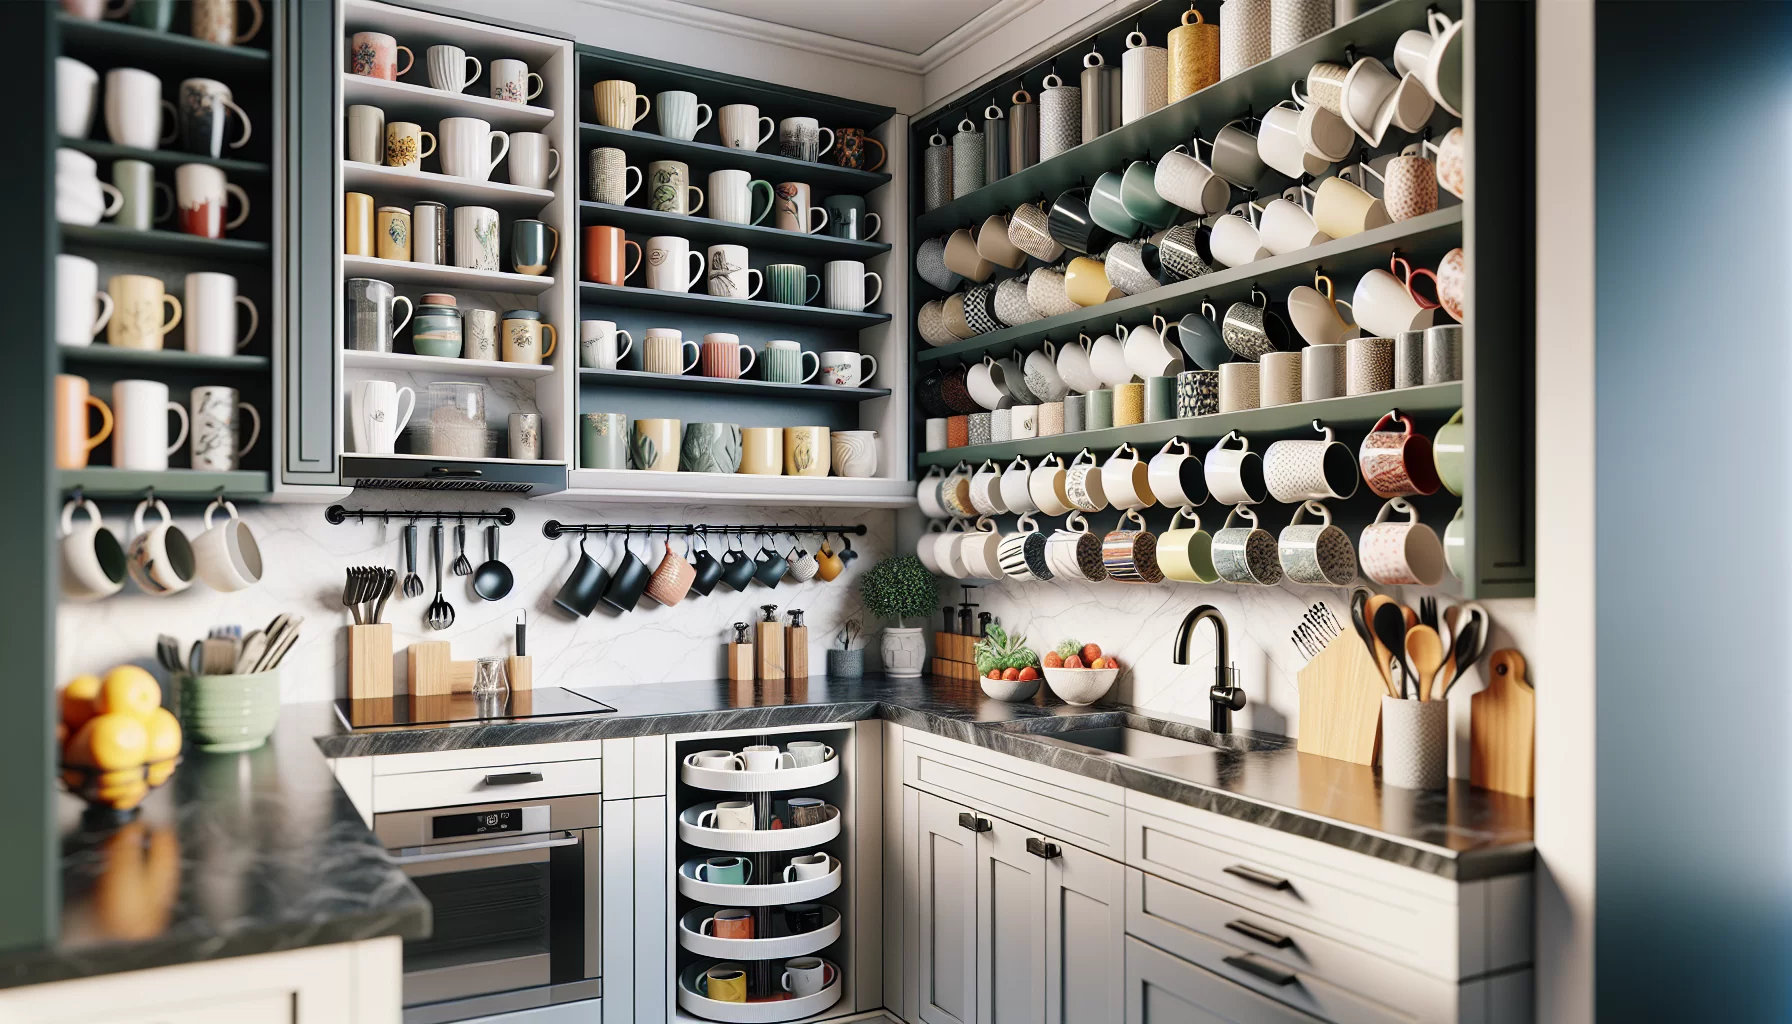 Discover creative mug storage solutions for optimizing your kitchen space